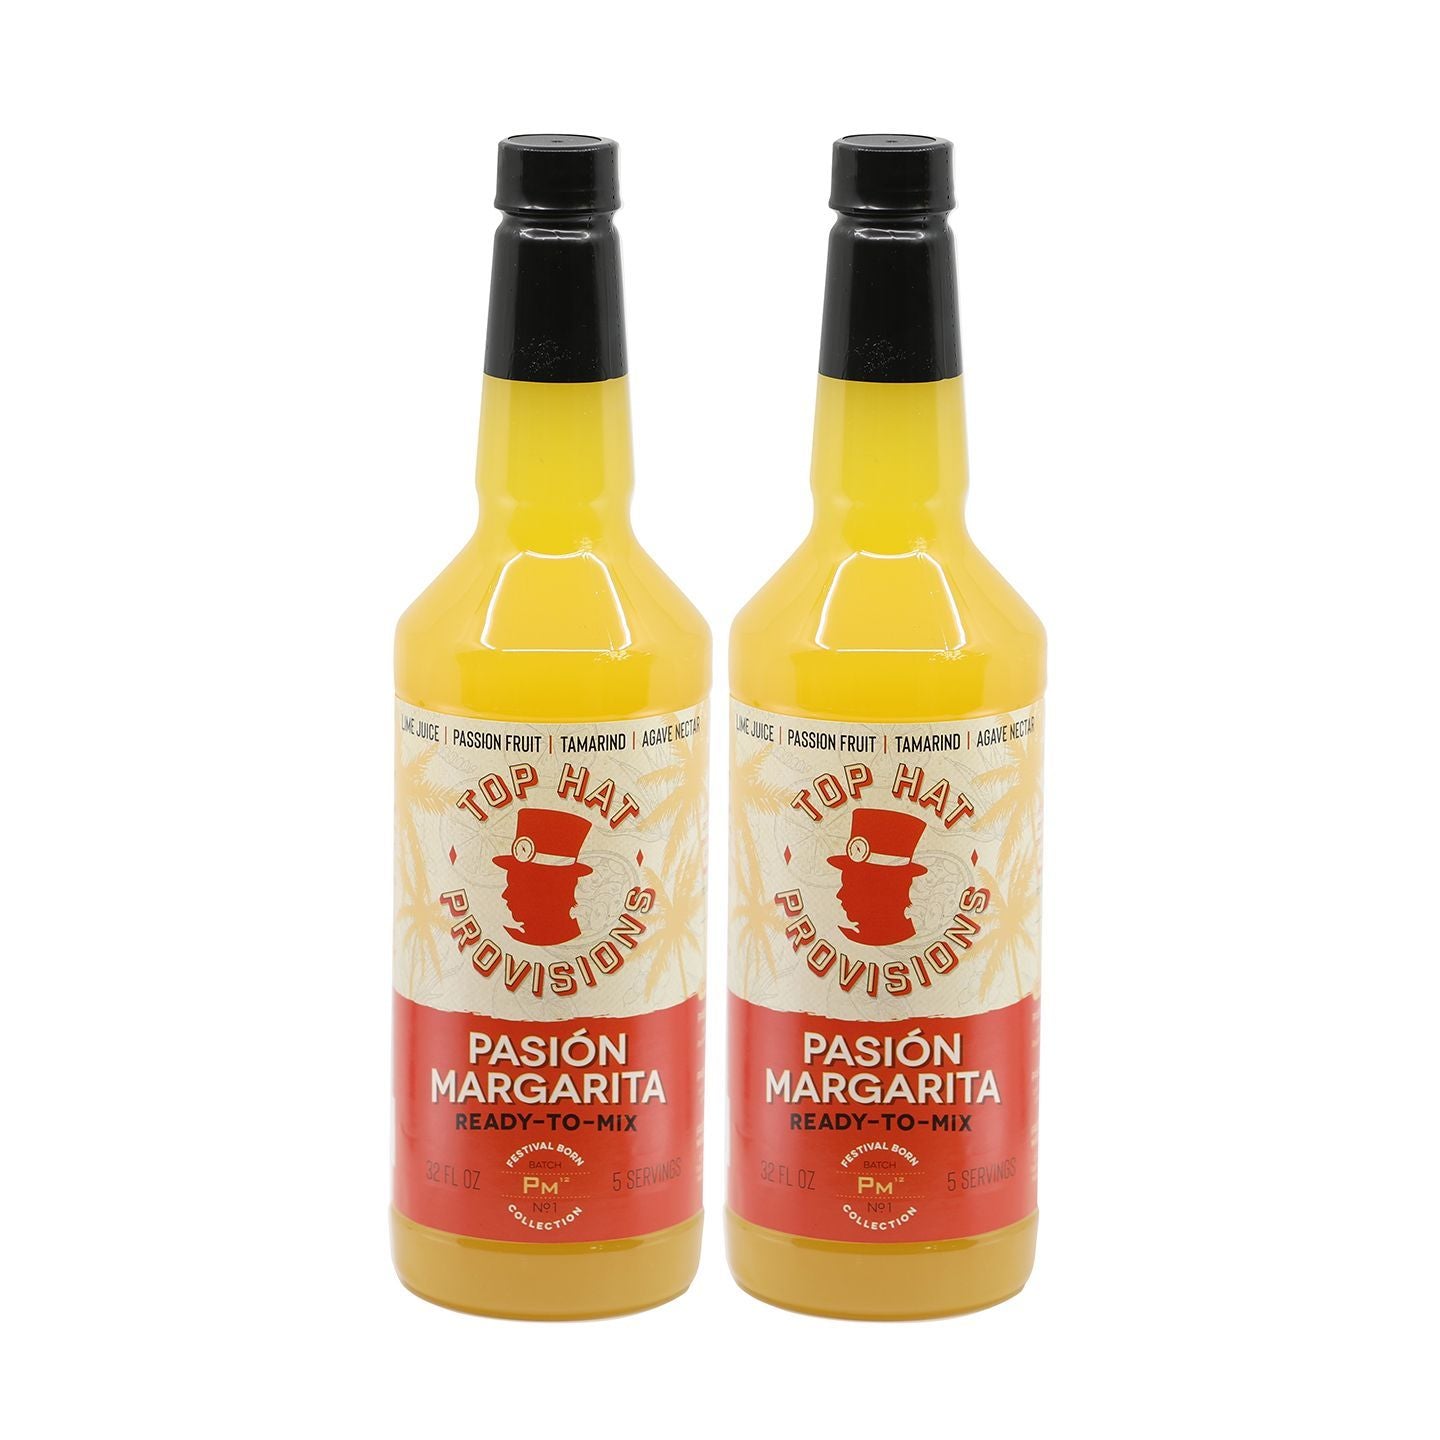 Top Hat Passion Fruit Margarita Mix (Made with real passion fruit & agave nectar)